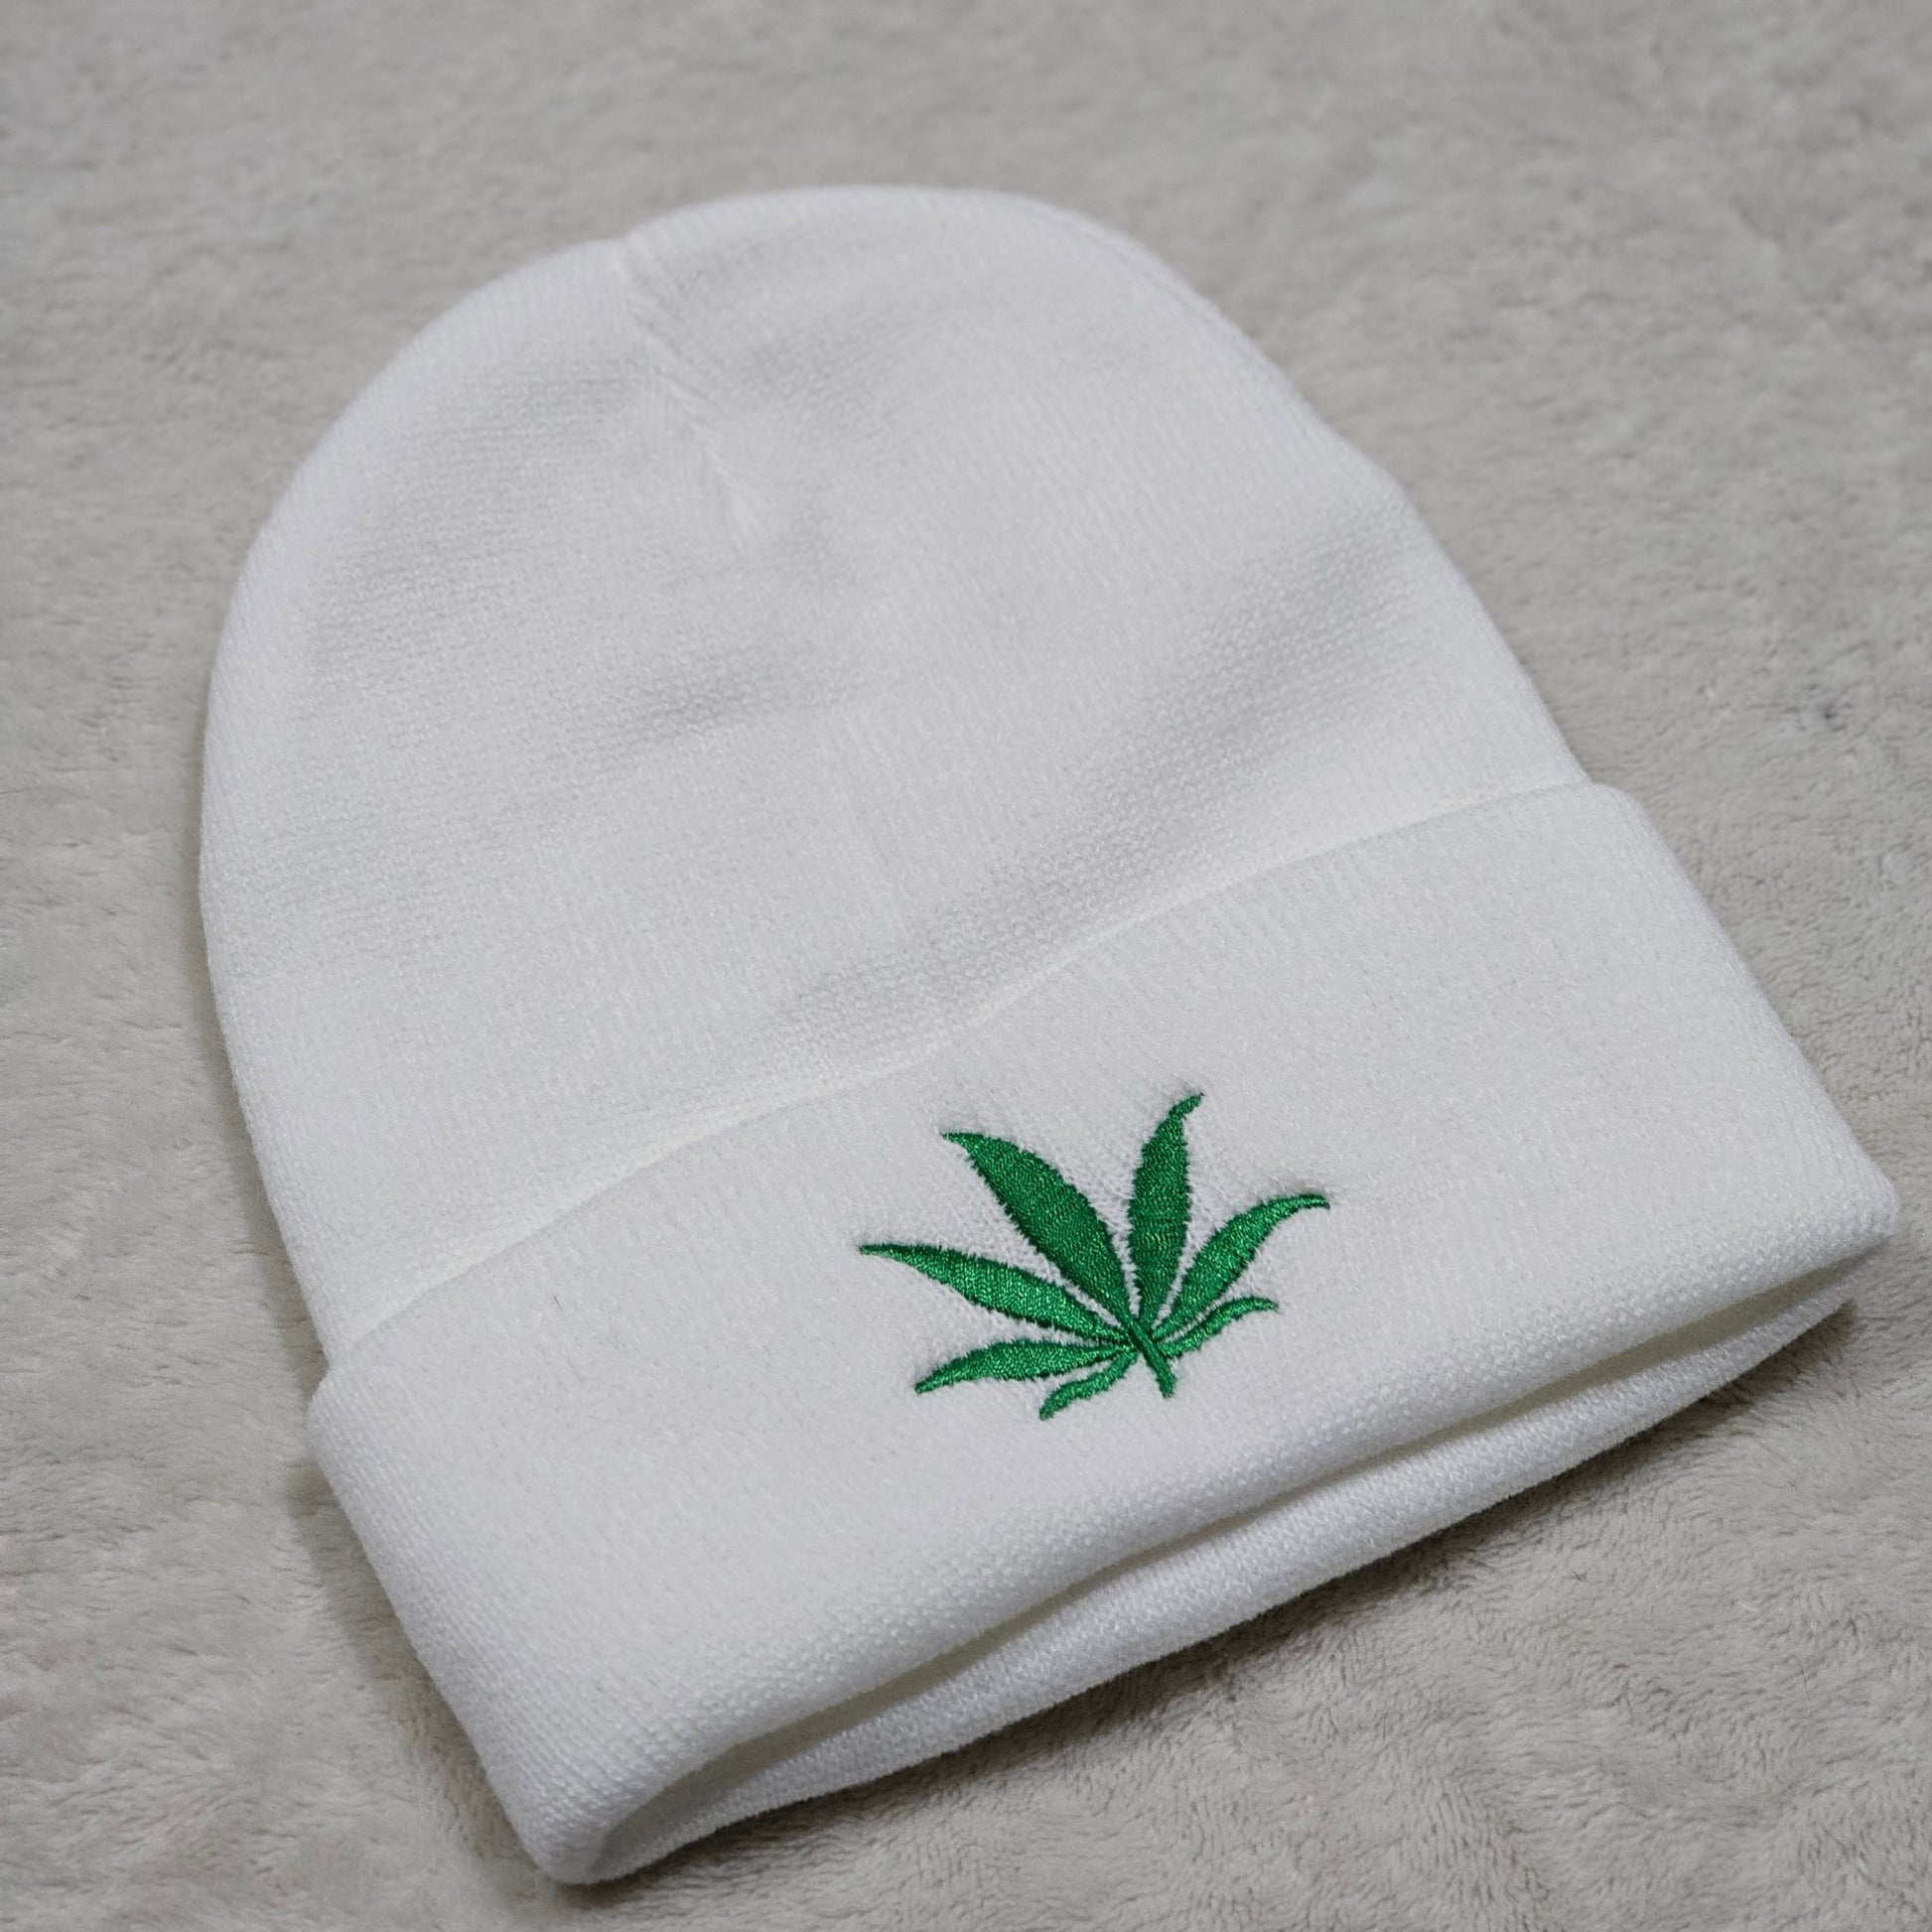 Unisex Embroidered Weed Leaf Beanie | Solid White with Green Pot Leaf at Front - A Gothic Universe - Beanies